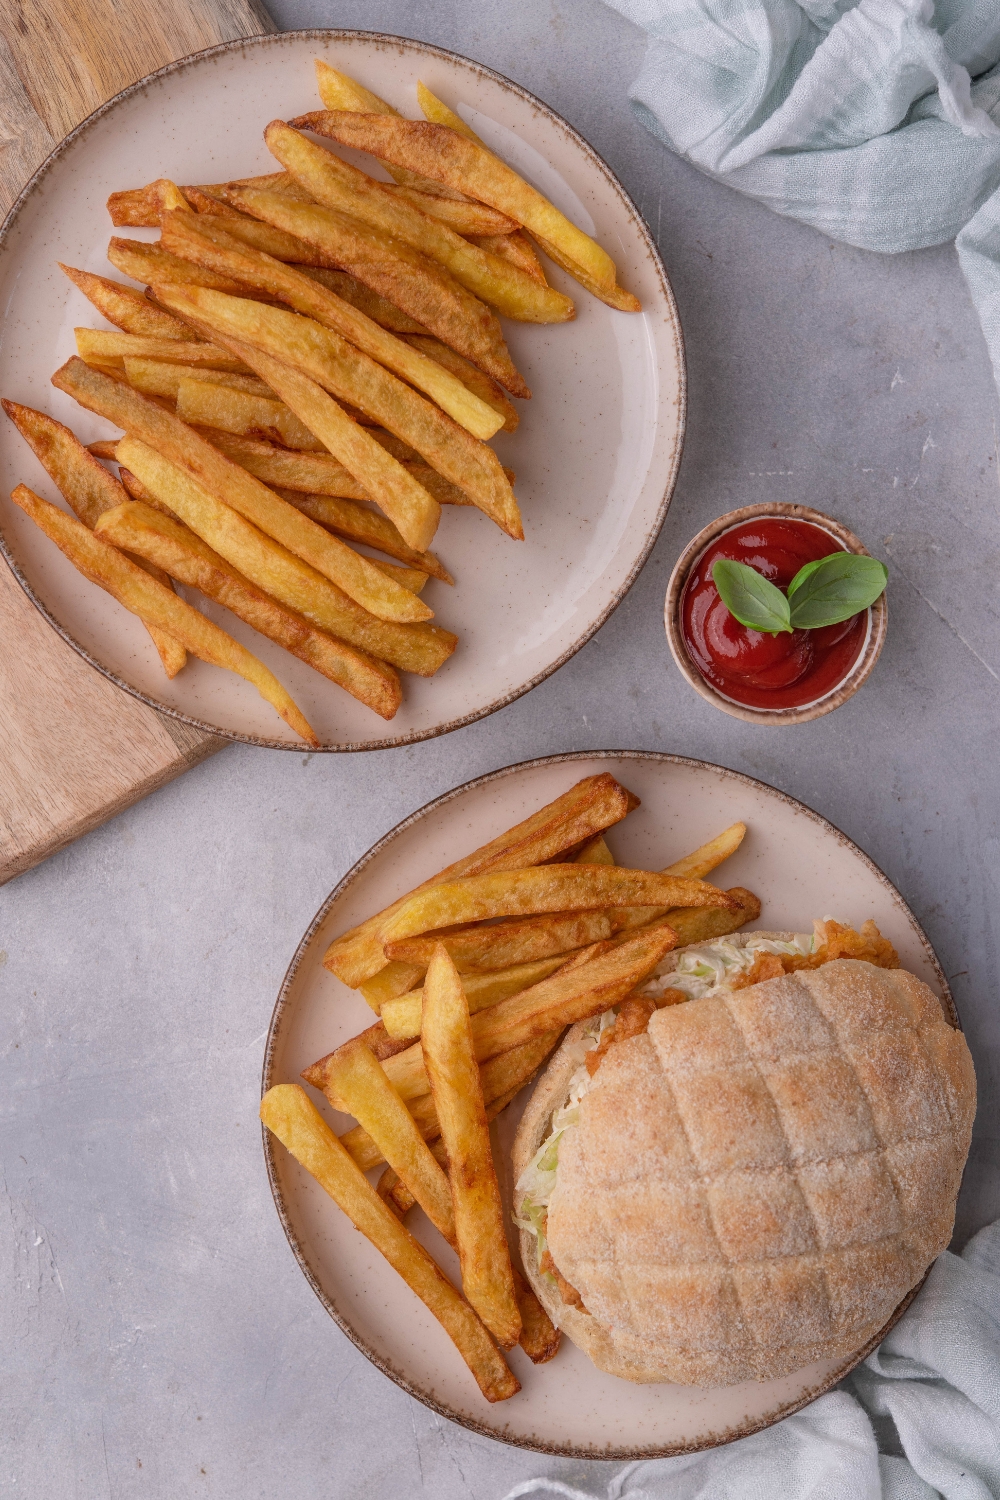 An overhead view of two plates, one with homemade french fries and another with fries and a sandwich on it. A small dipping cup with ketchup sits in the middle of it.